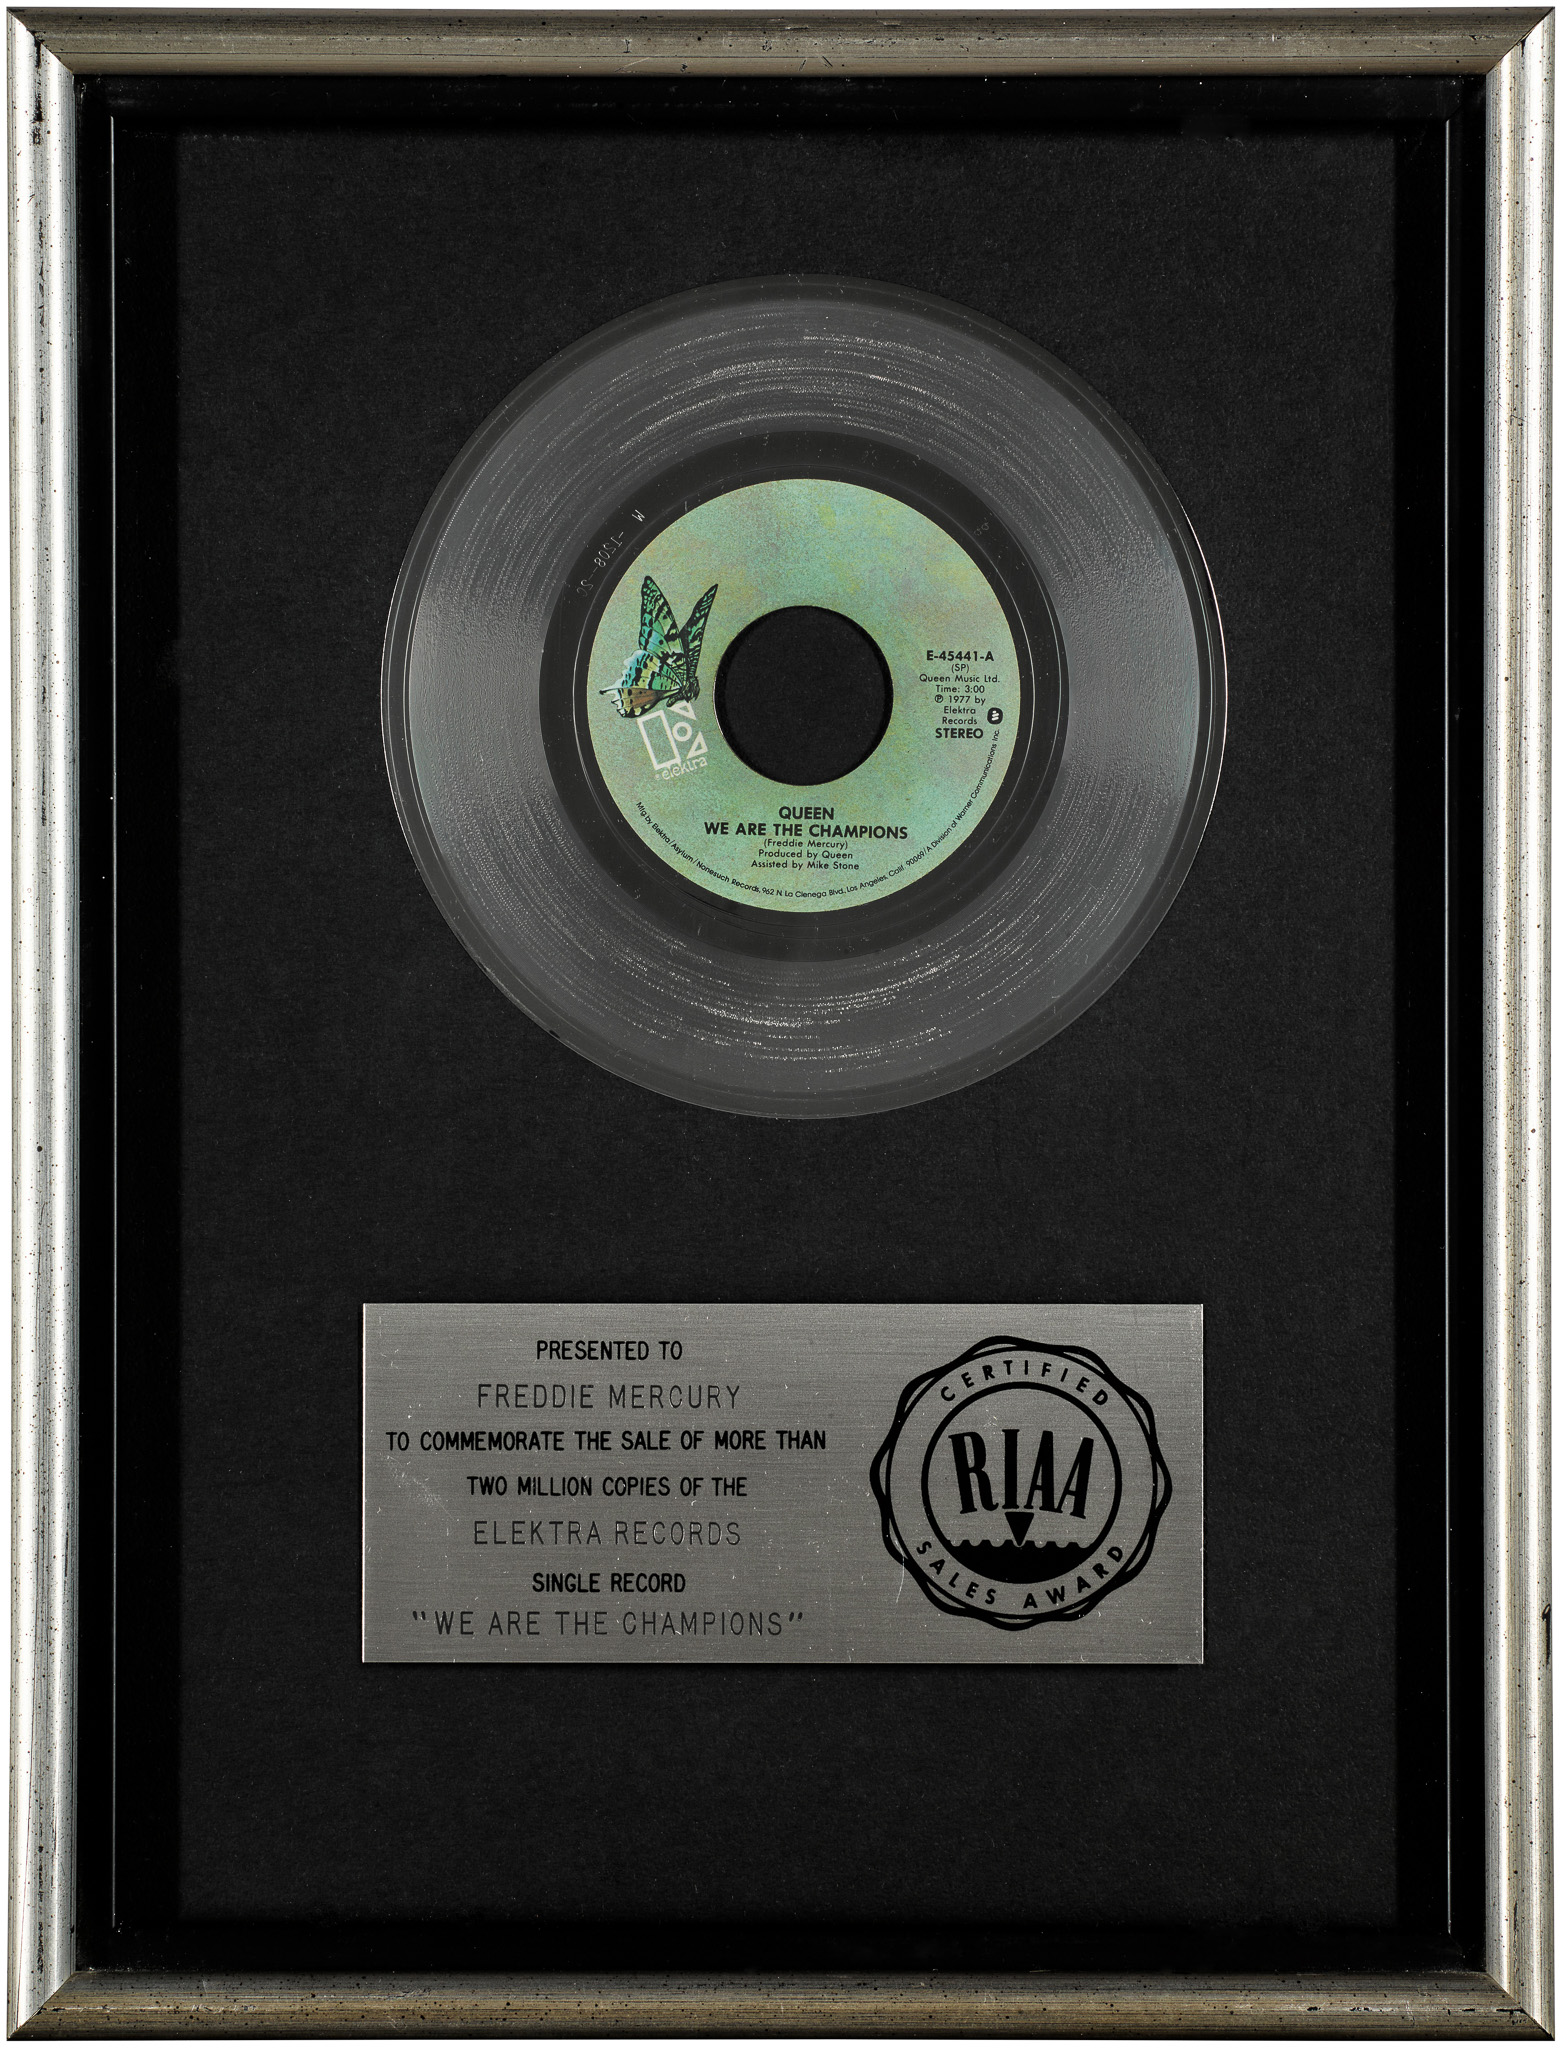 The Wick - Platinum Disc Award for We Are The Champions, est. £3,000 - £5,000, courtesy of Sotheby's